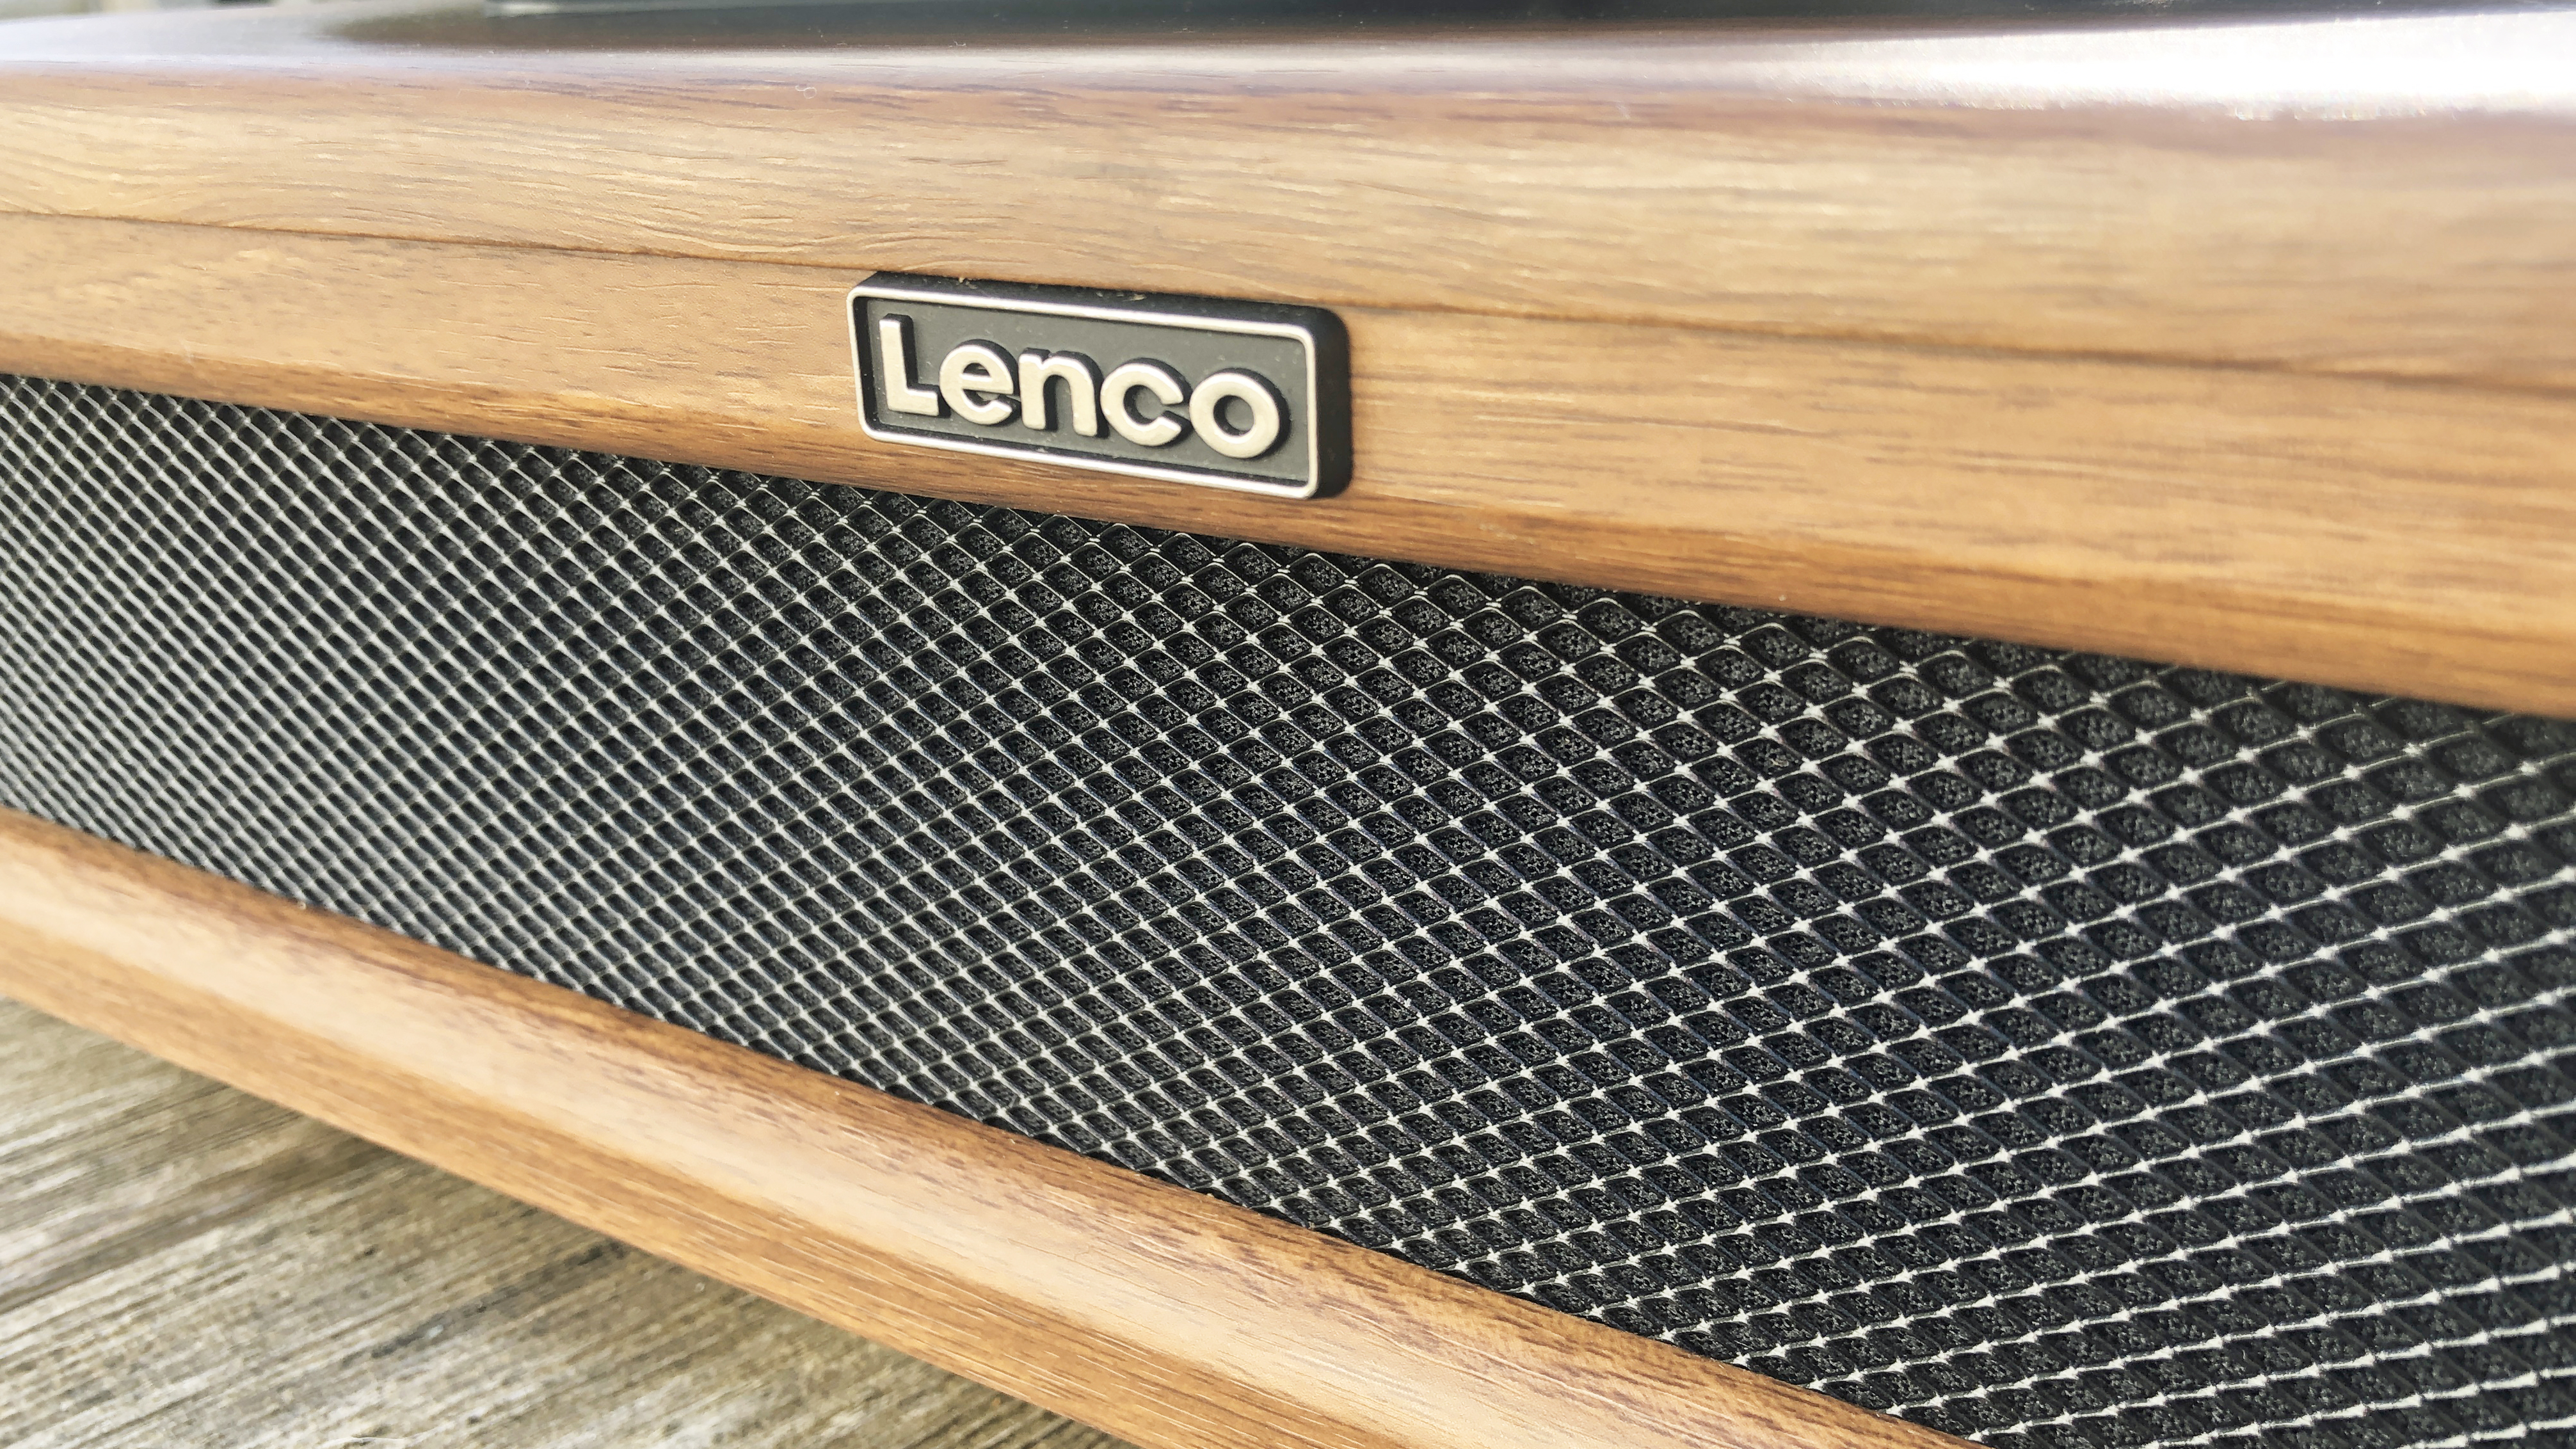 the speaker grille on the lenco ls-410 turntable